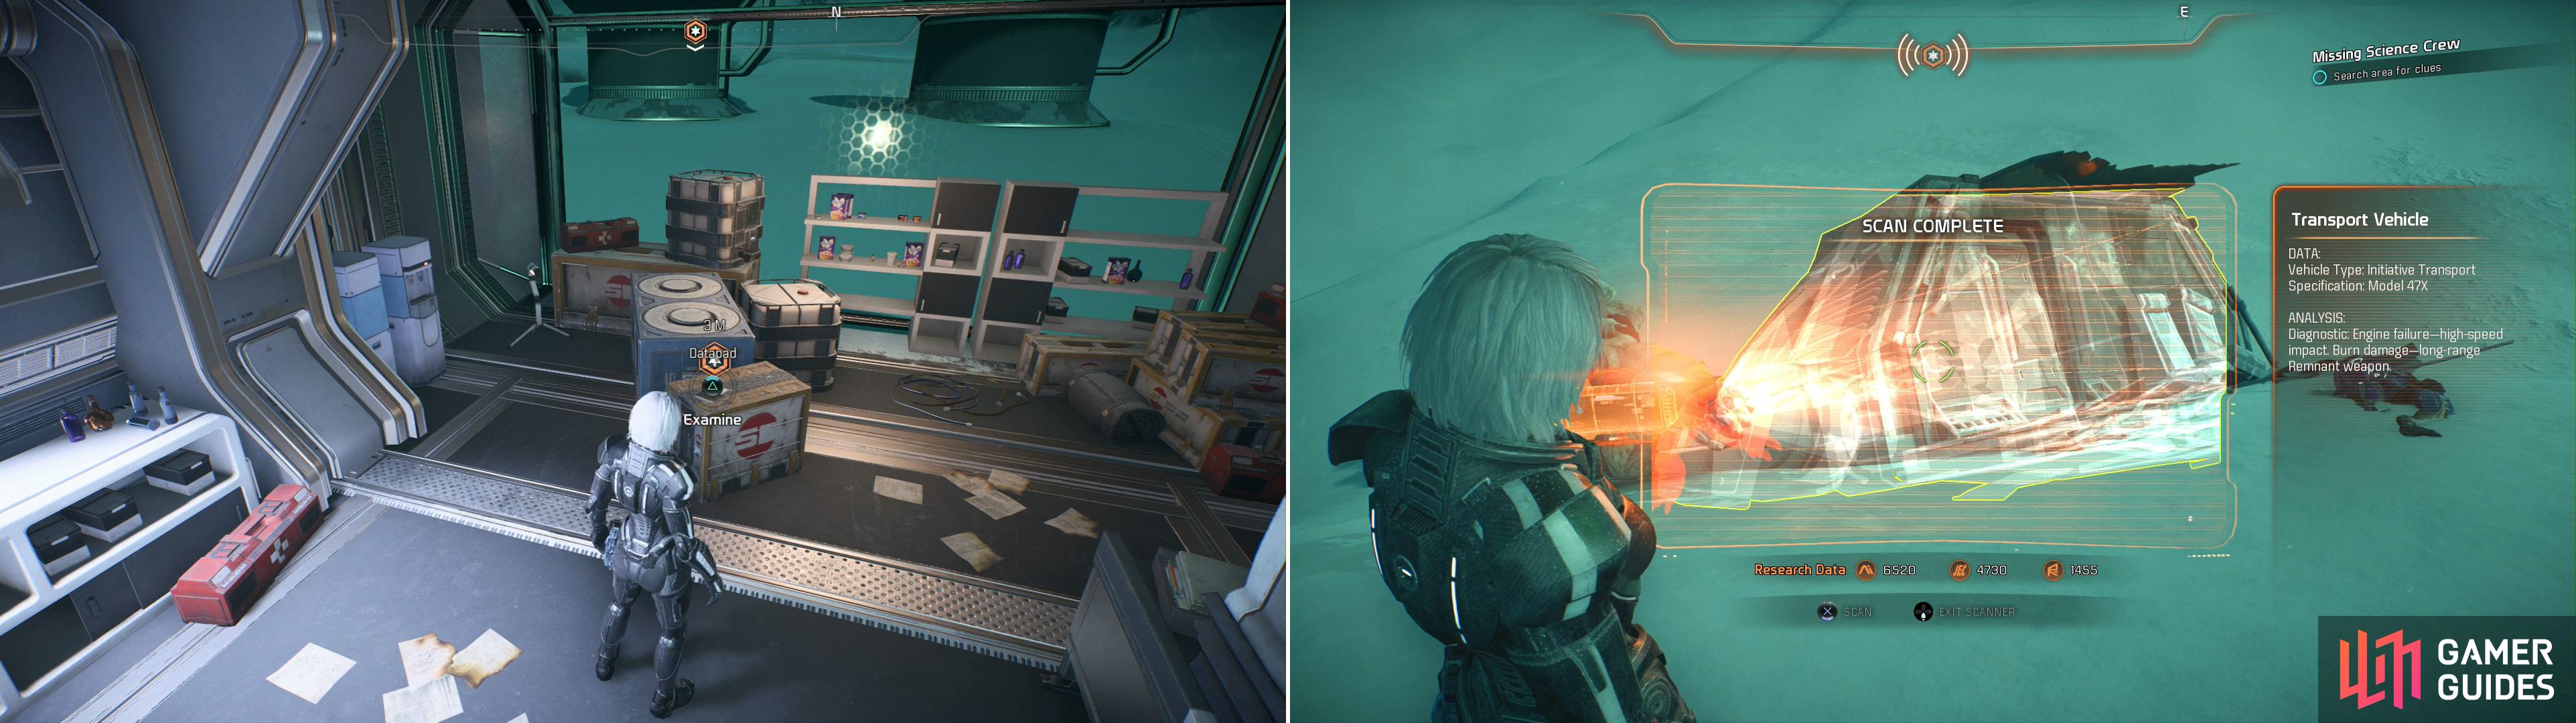 Search a datapad in the Voeld outpost to find out where Priya Blakes team went (left) then track them down and scan their remains (right).